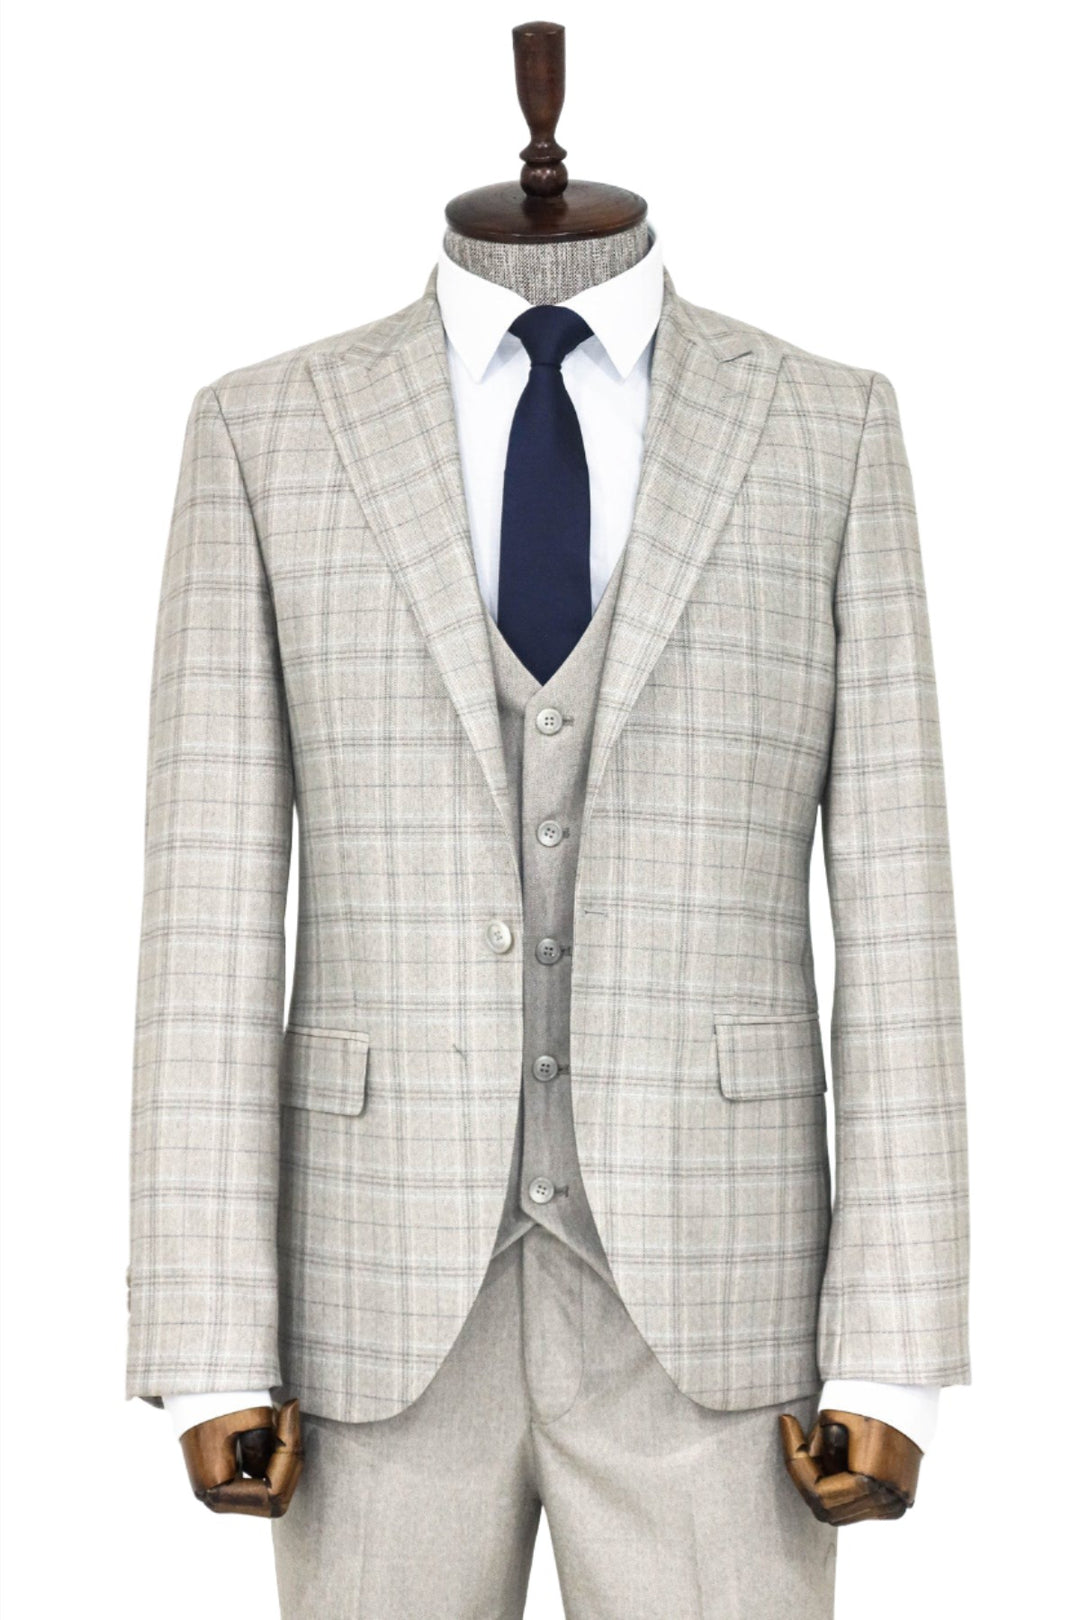 Checked Slim Fit Cream Men Suit and Shirt Combination- Wessi